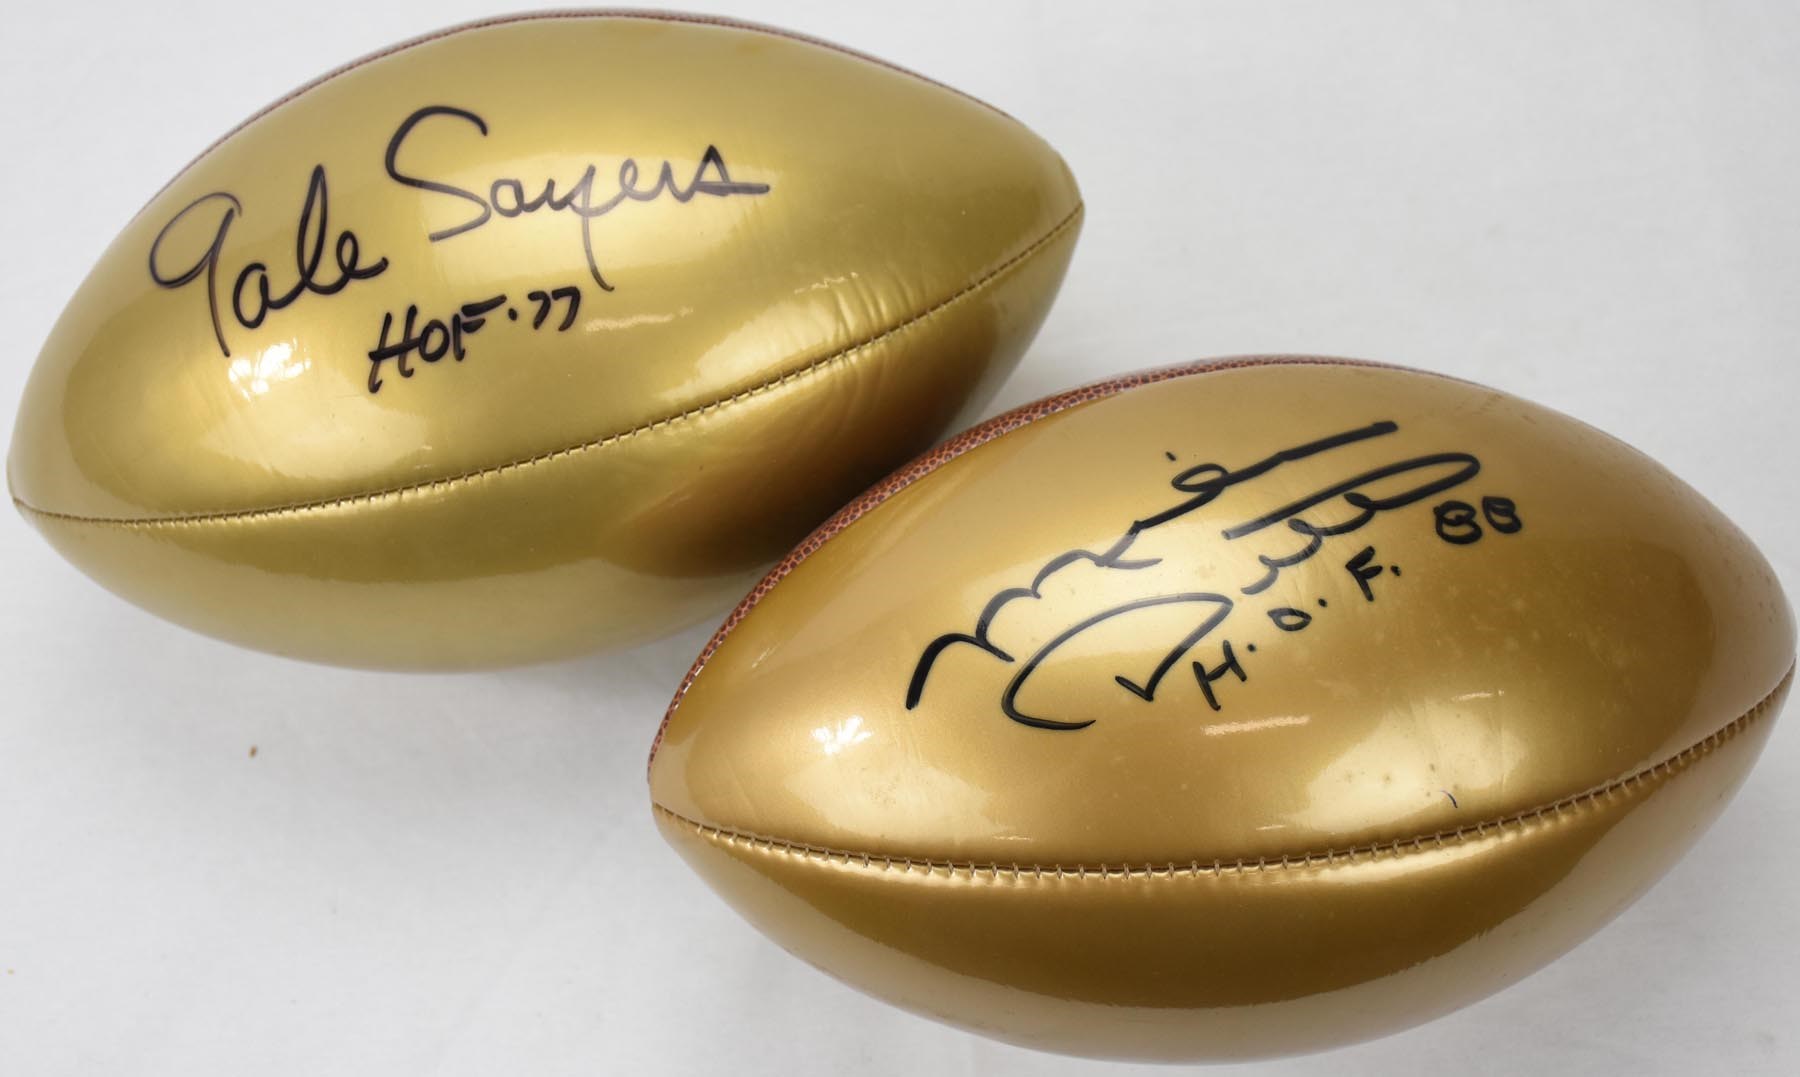 Gale Sayers & Mike Ditka Signed Footballs